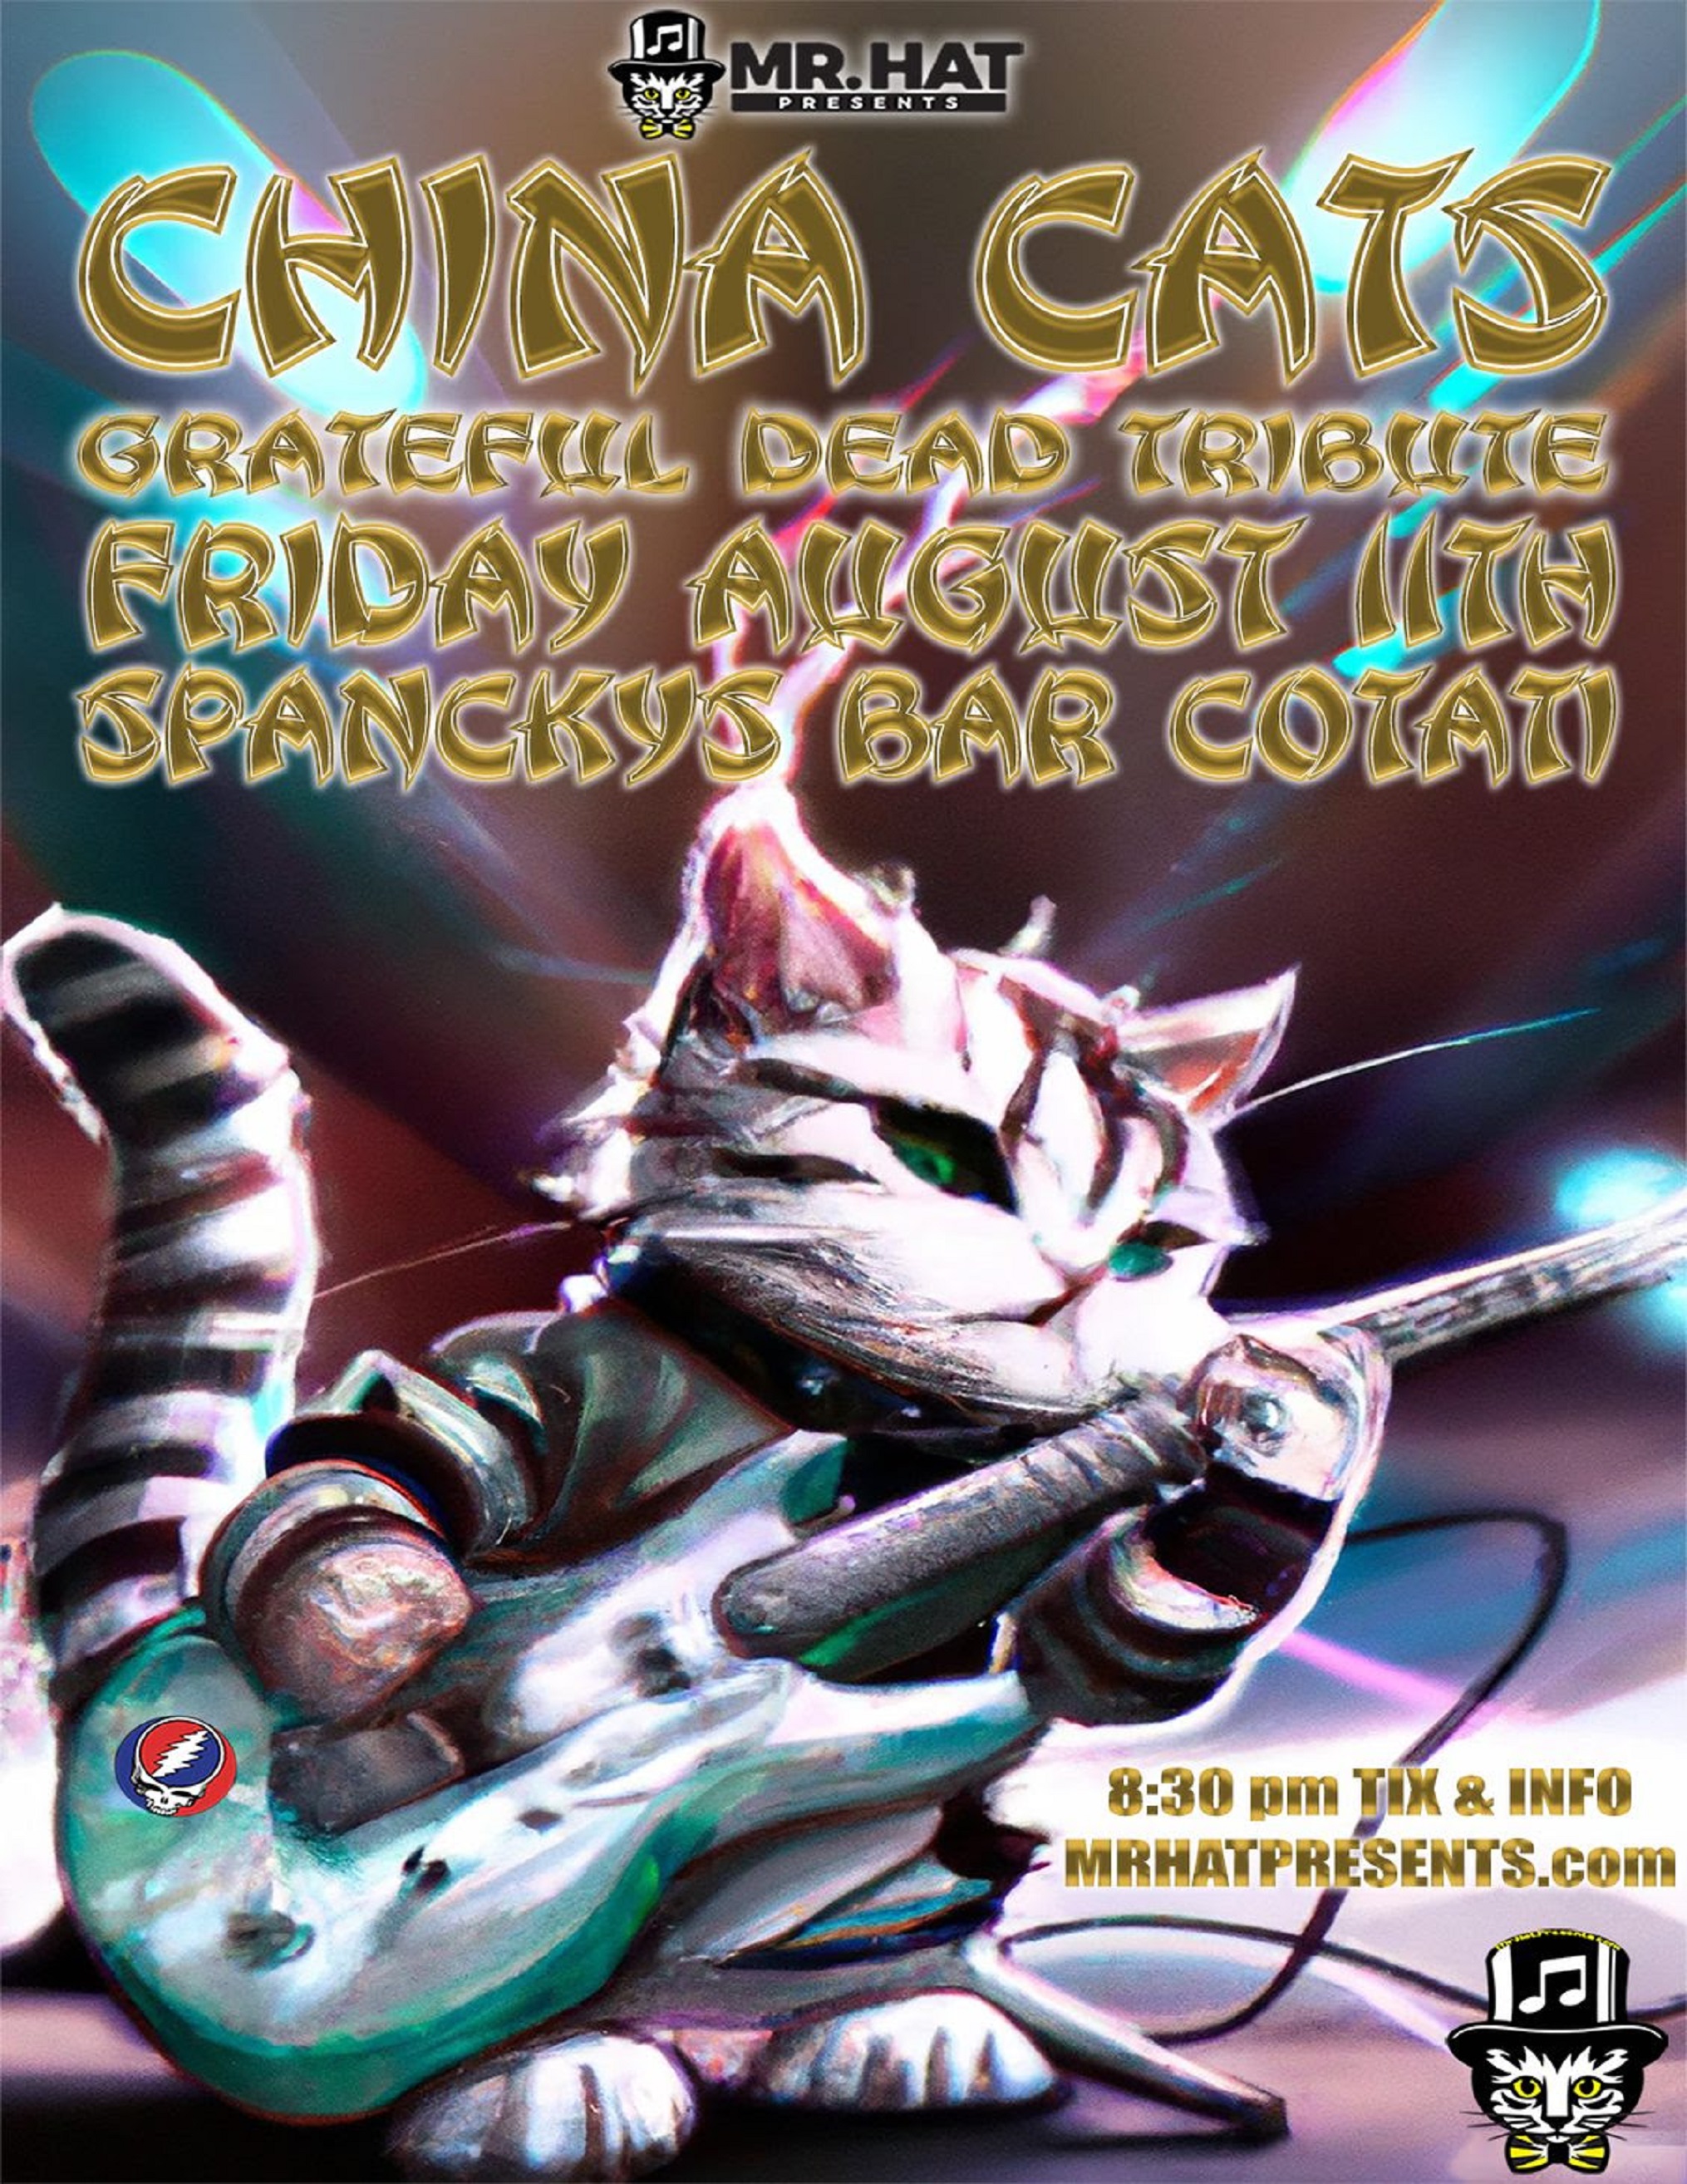 The China Cats in Cotati @ Spancky's | 8/11/23